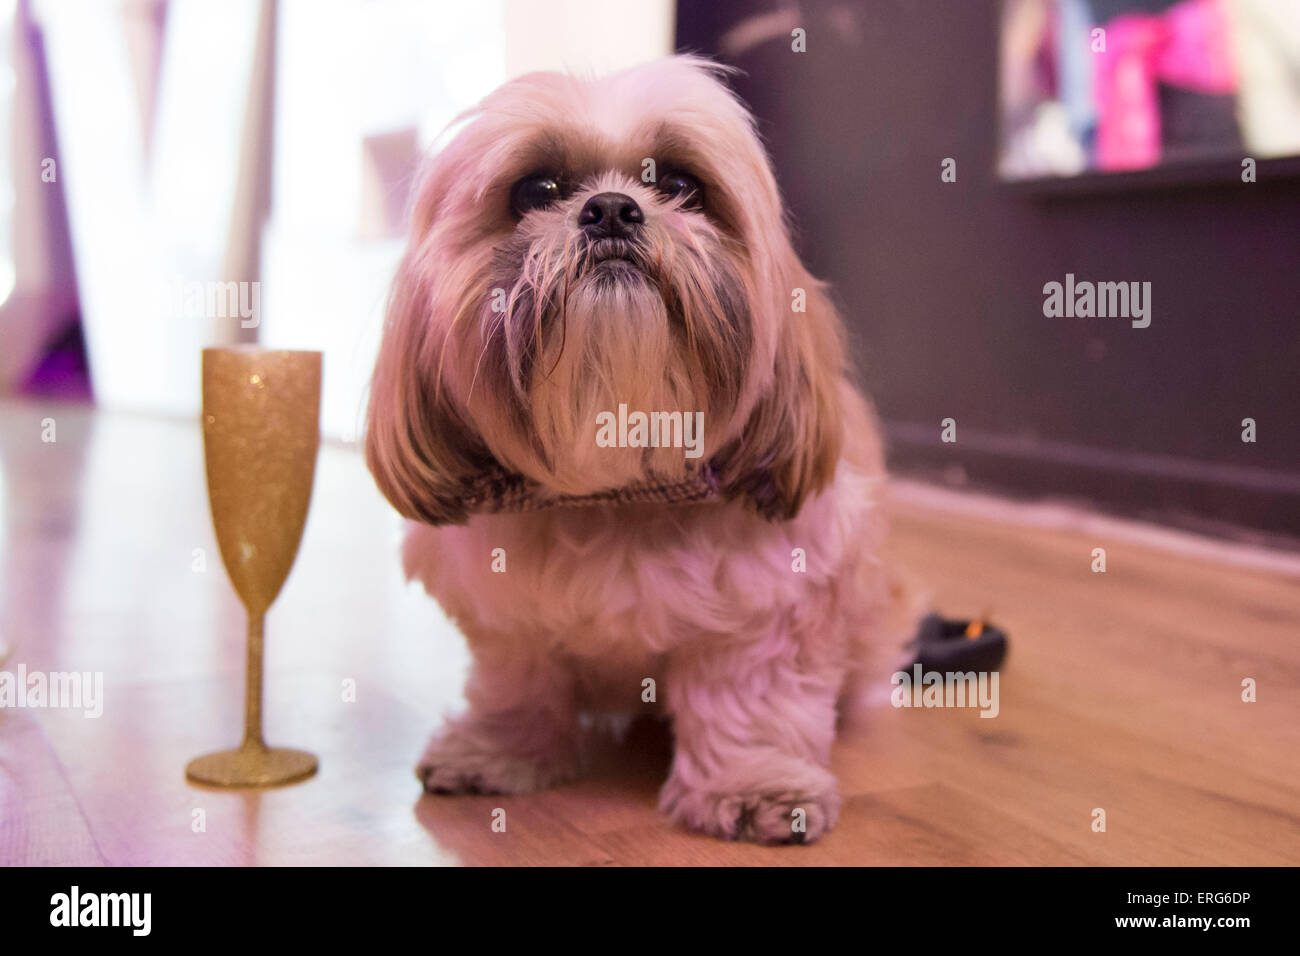 A drunk pampered dog lies next to a crystal champagne glass. Stock Photo